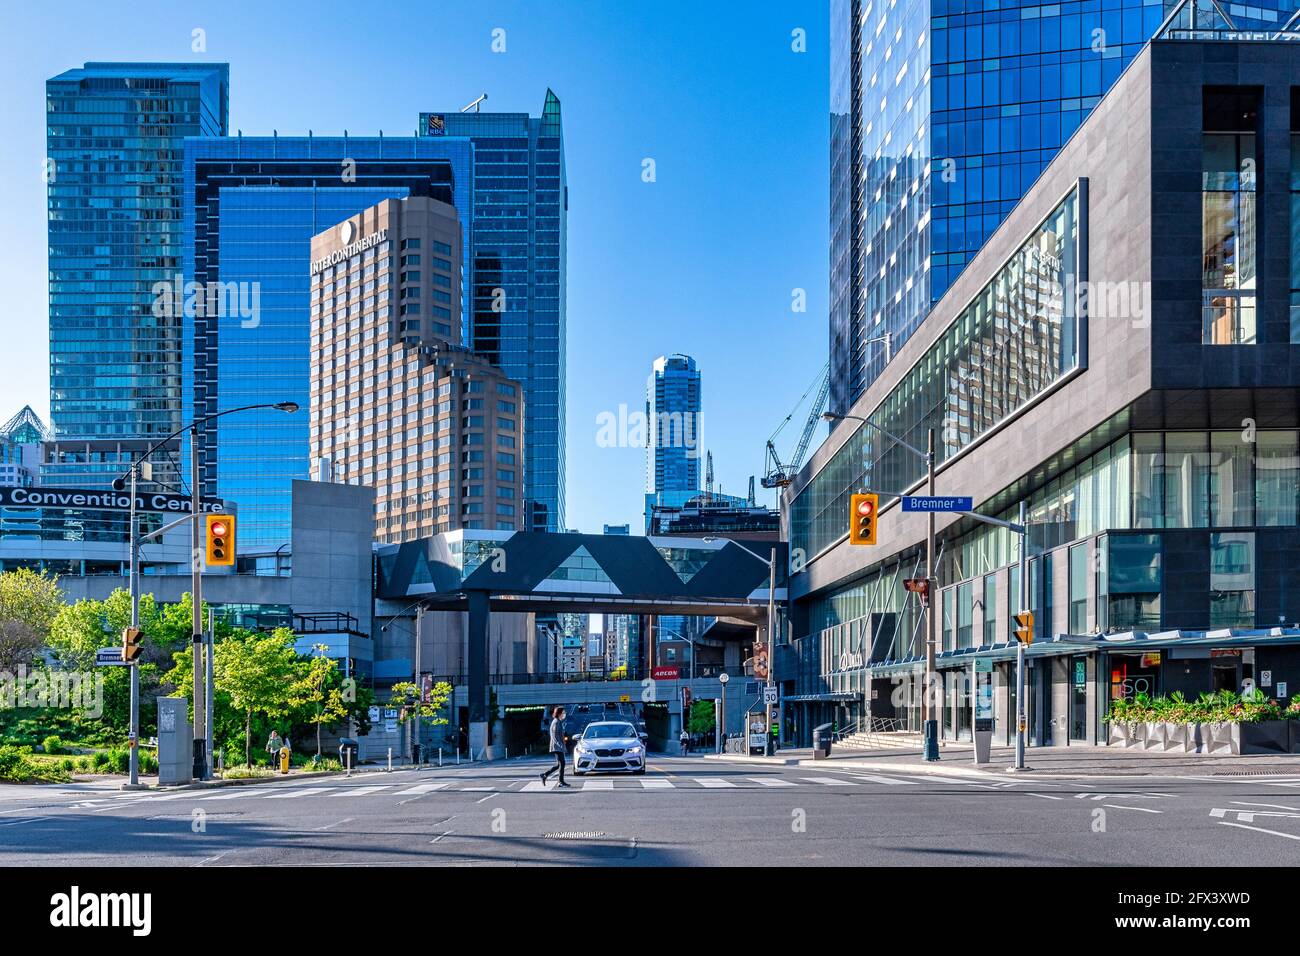 The downtown district of Toronto, Canada. The image shows the pedestrian bridge of the Skywalk. The bridge crosses over Simcoe Street. East to West po Stock Photo